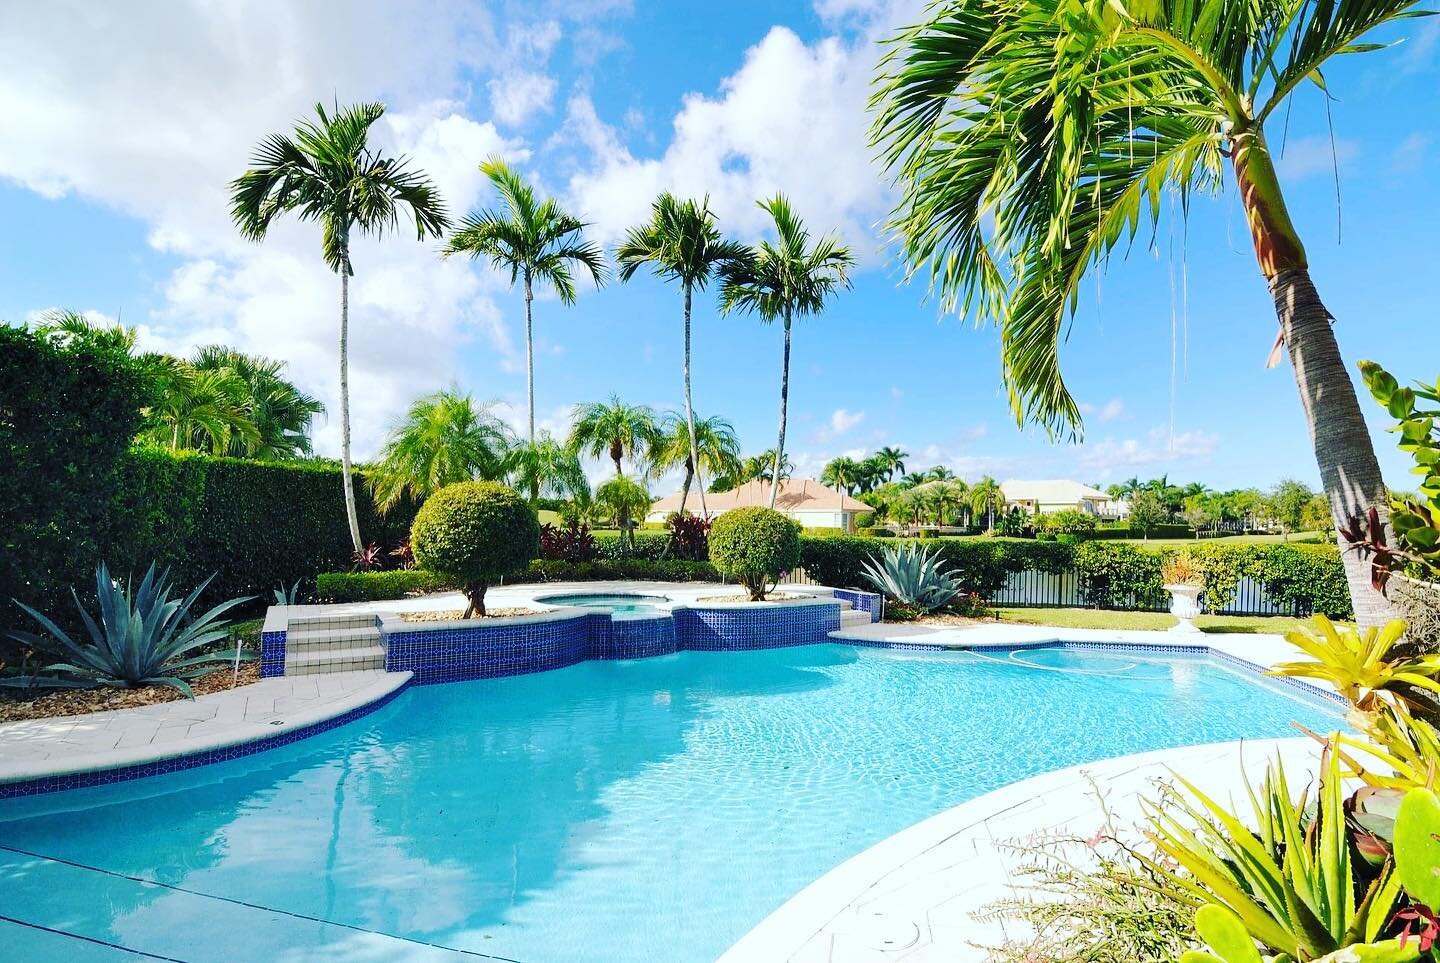 &quot;Dive into a World of Crystal-Clear Bliss! 💦✨ Let us turn your pool into a sparkling oasis. 🏊&zwj;♂️ Call us today for a splash of perfection. 📞 #PoolCleaningPros #SwimInStyle&quot;#palmcoast